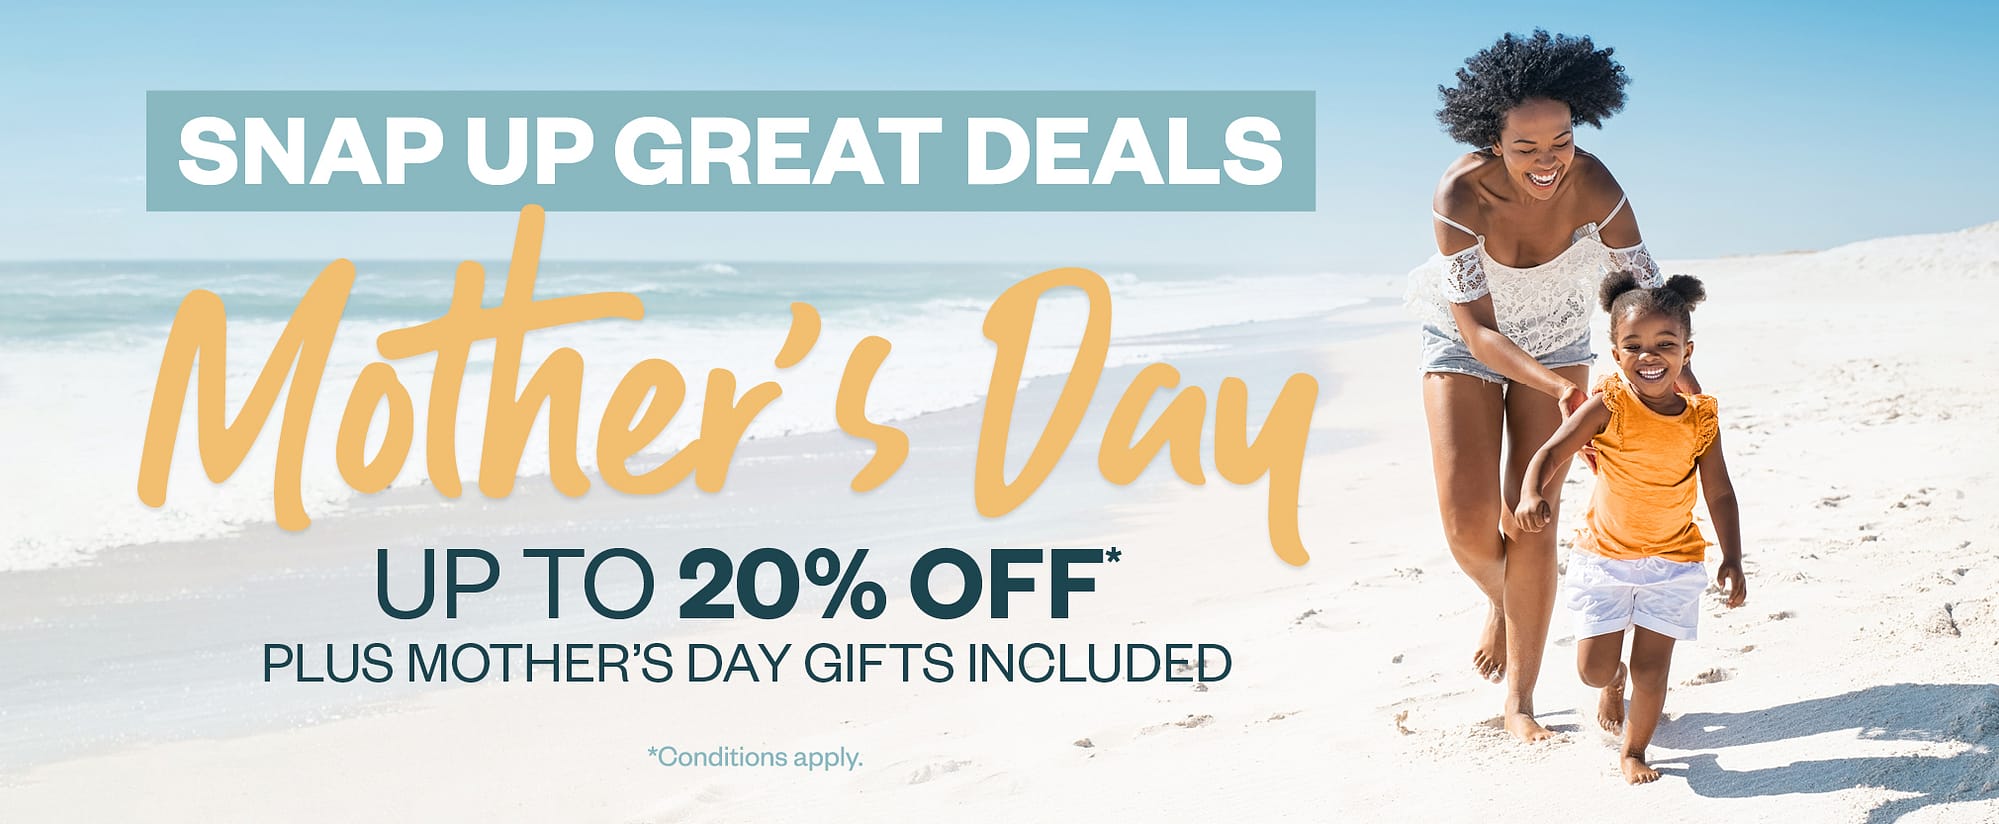 Mother’s Day Gifts & Deals